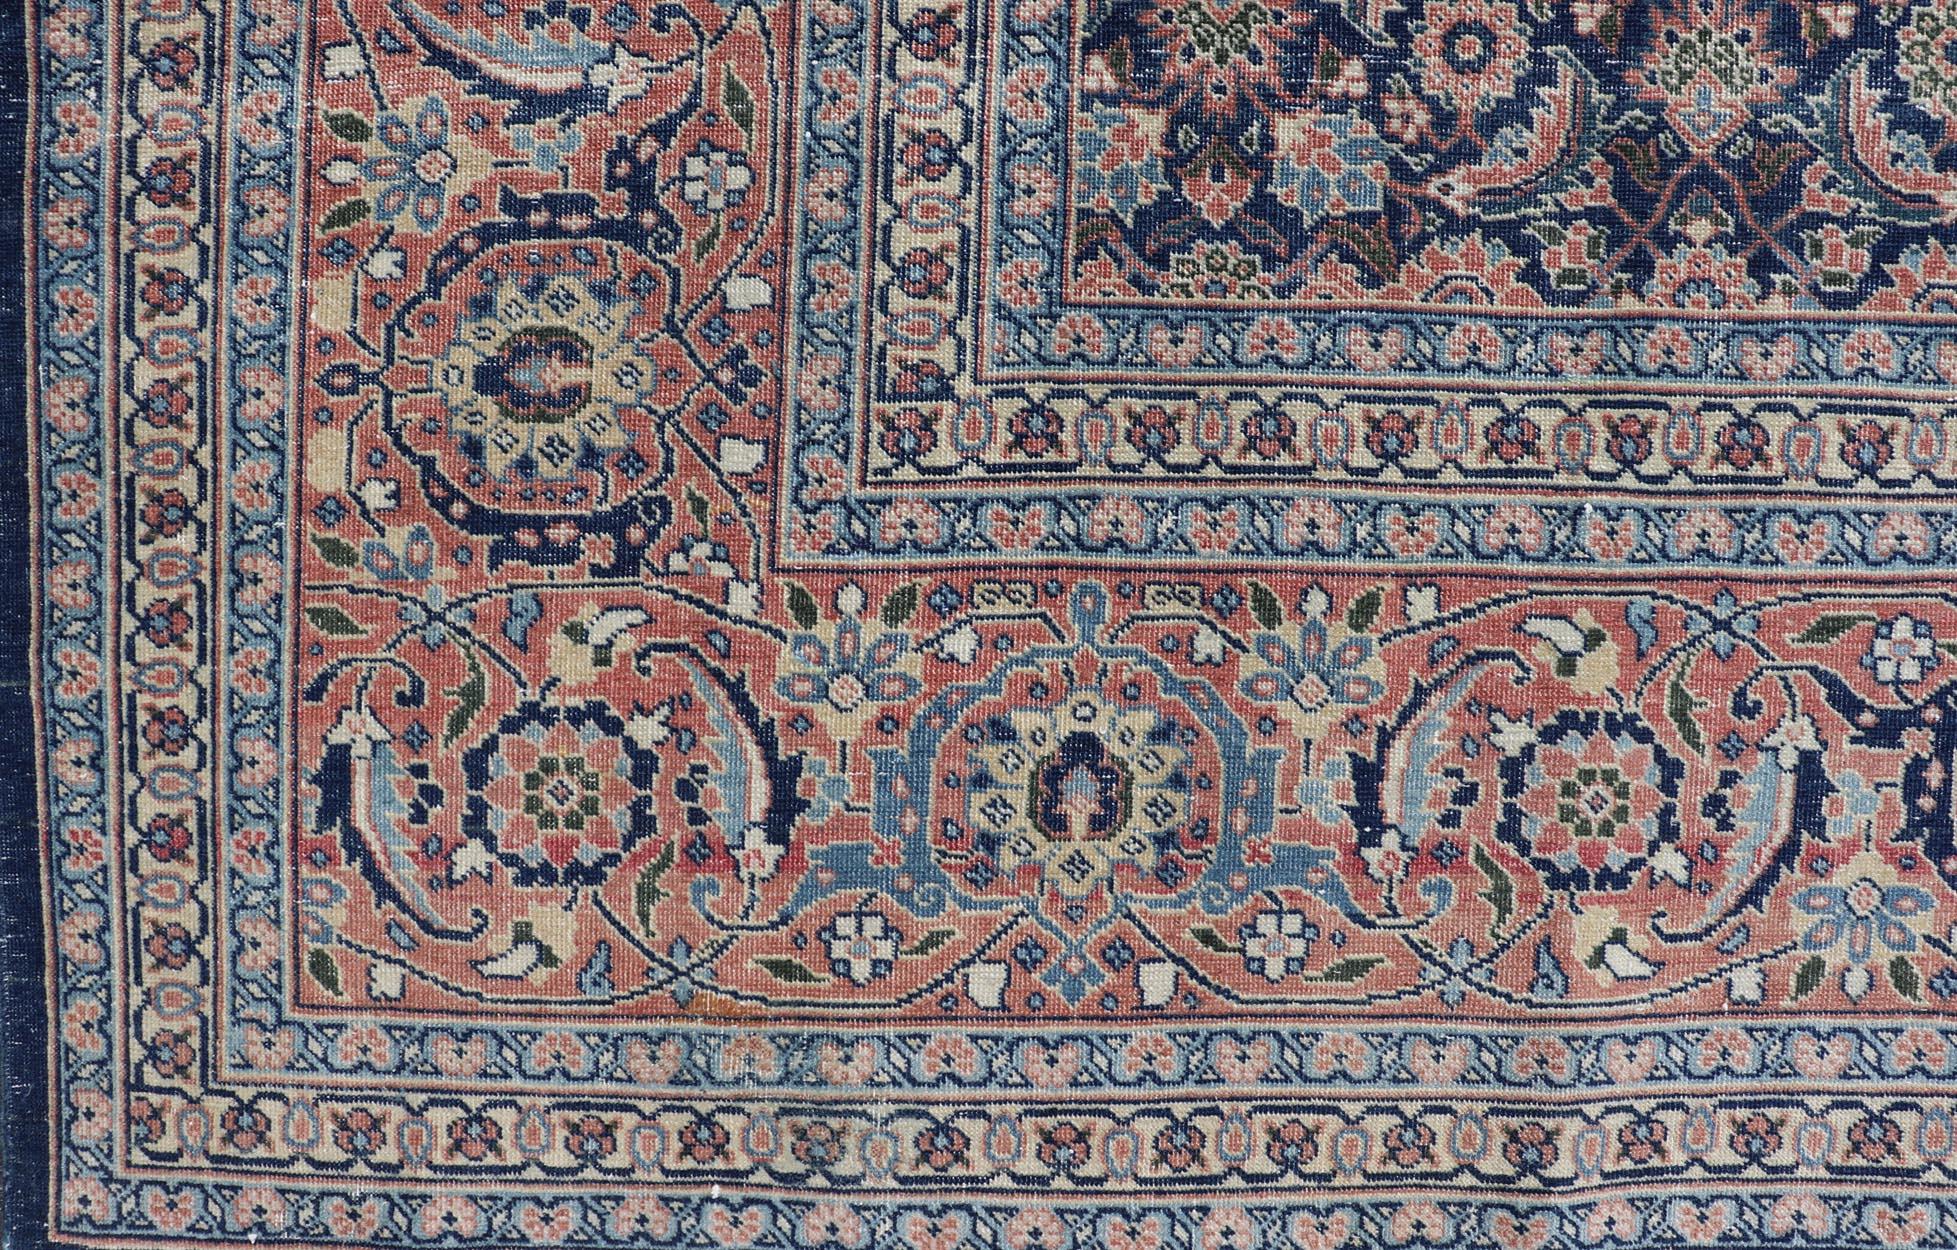 This hand knotted antique Persian Tabriz rug features an all-over, sub-geometric floral design rendered in blue, coral, orange, ivory and blue shades, set upon a navy blue background. A complementary, multi-tiered border encompasses the entirety of